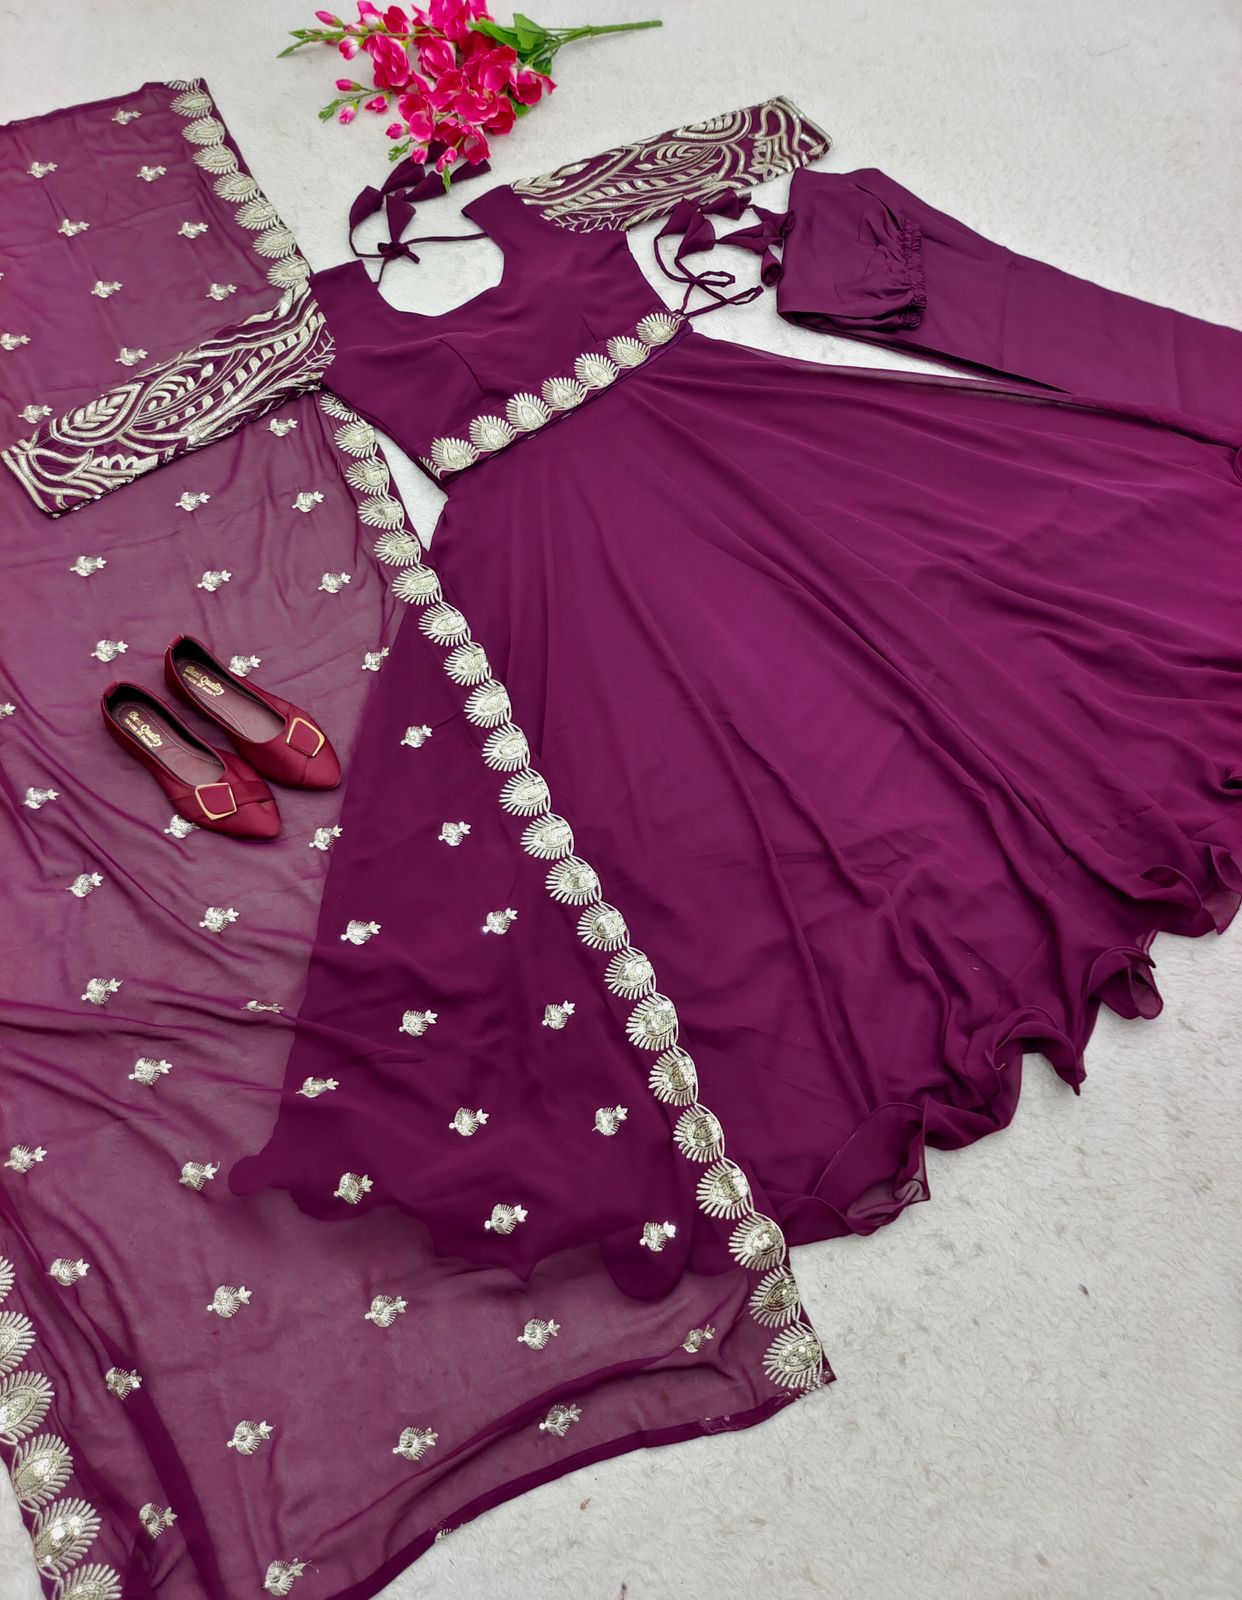 Full Embroidery Work Sleeve Wine Color Anarkali Gown